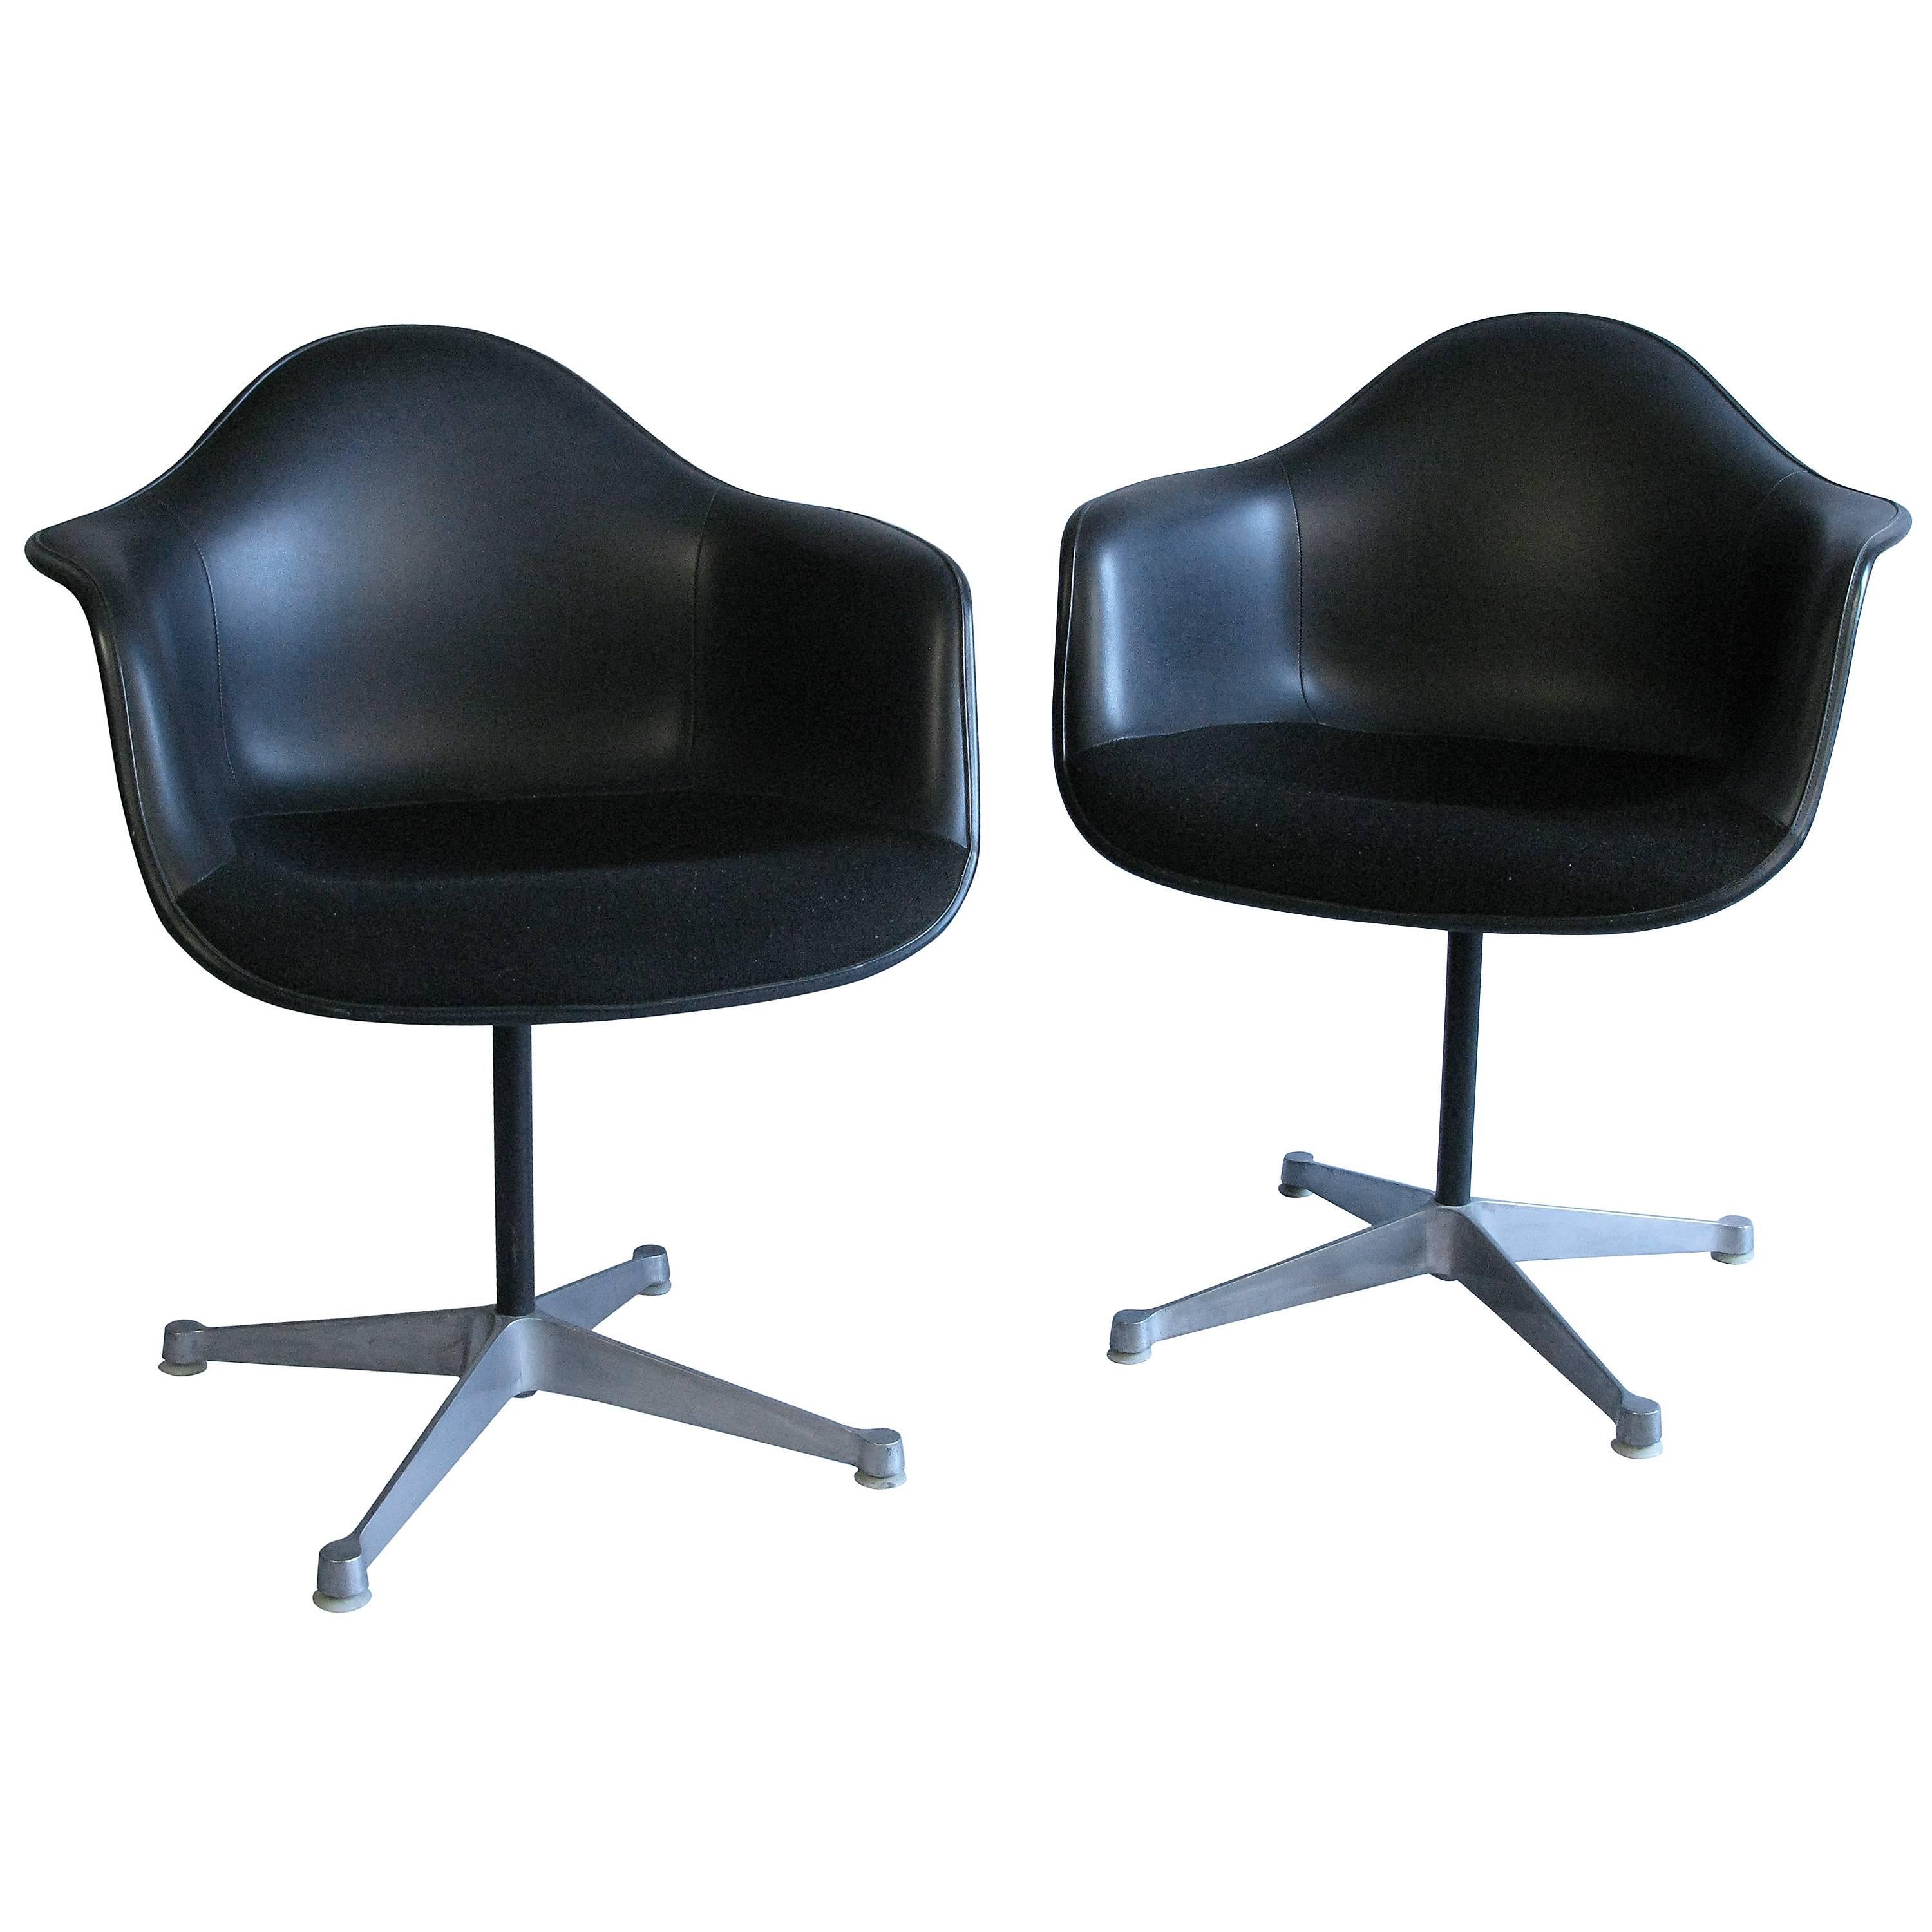 Pair of 1960s Charles Eames for Herman Miller Swivel Chairs